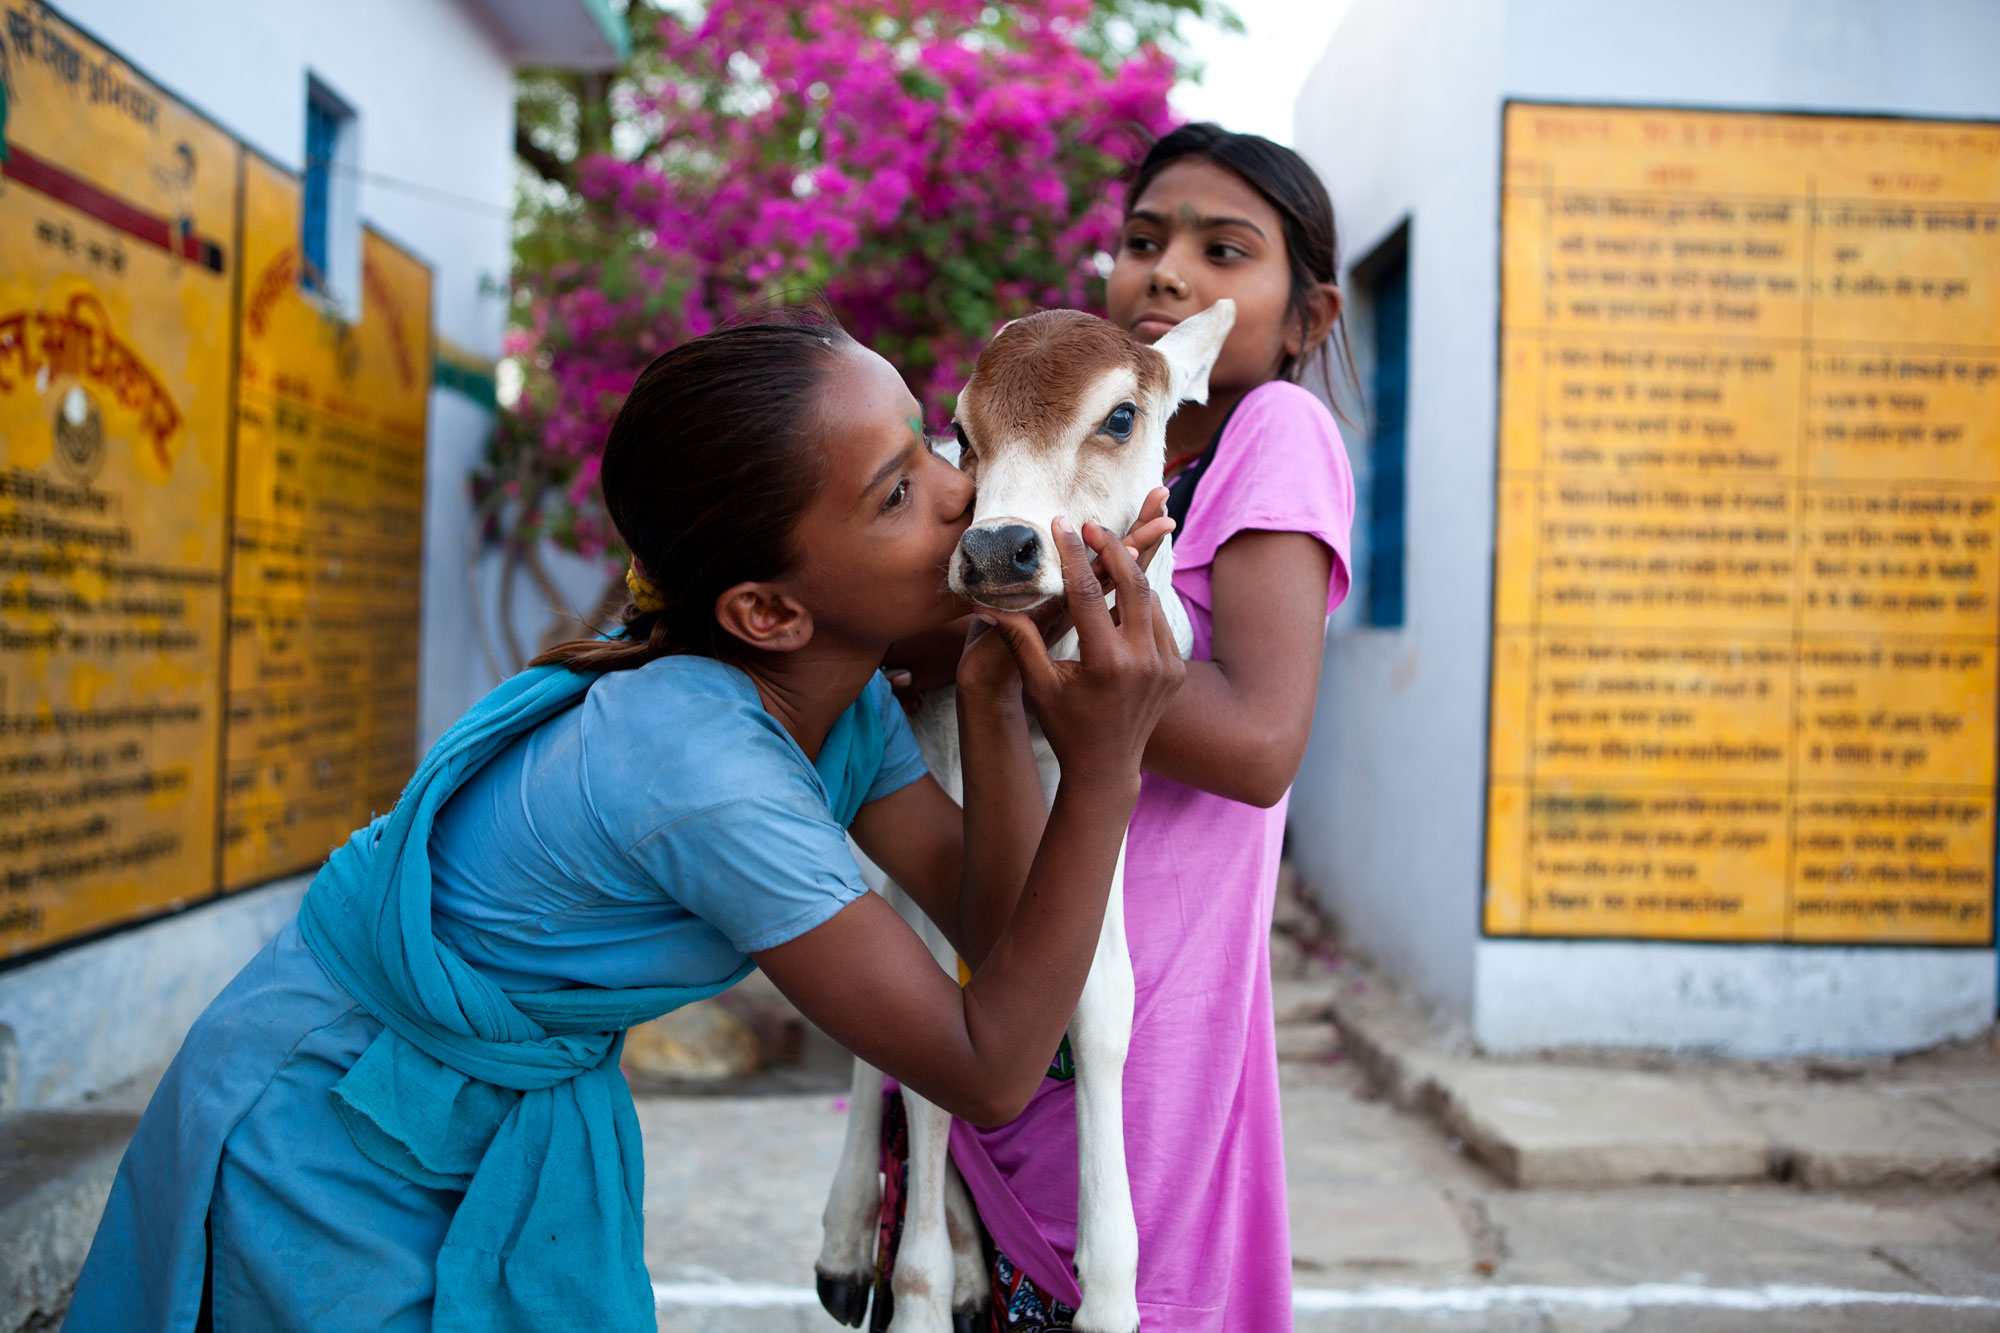 Two Indian girls hugging a young goat